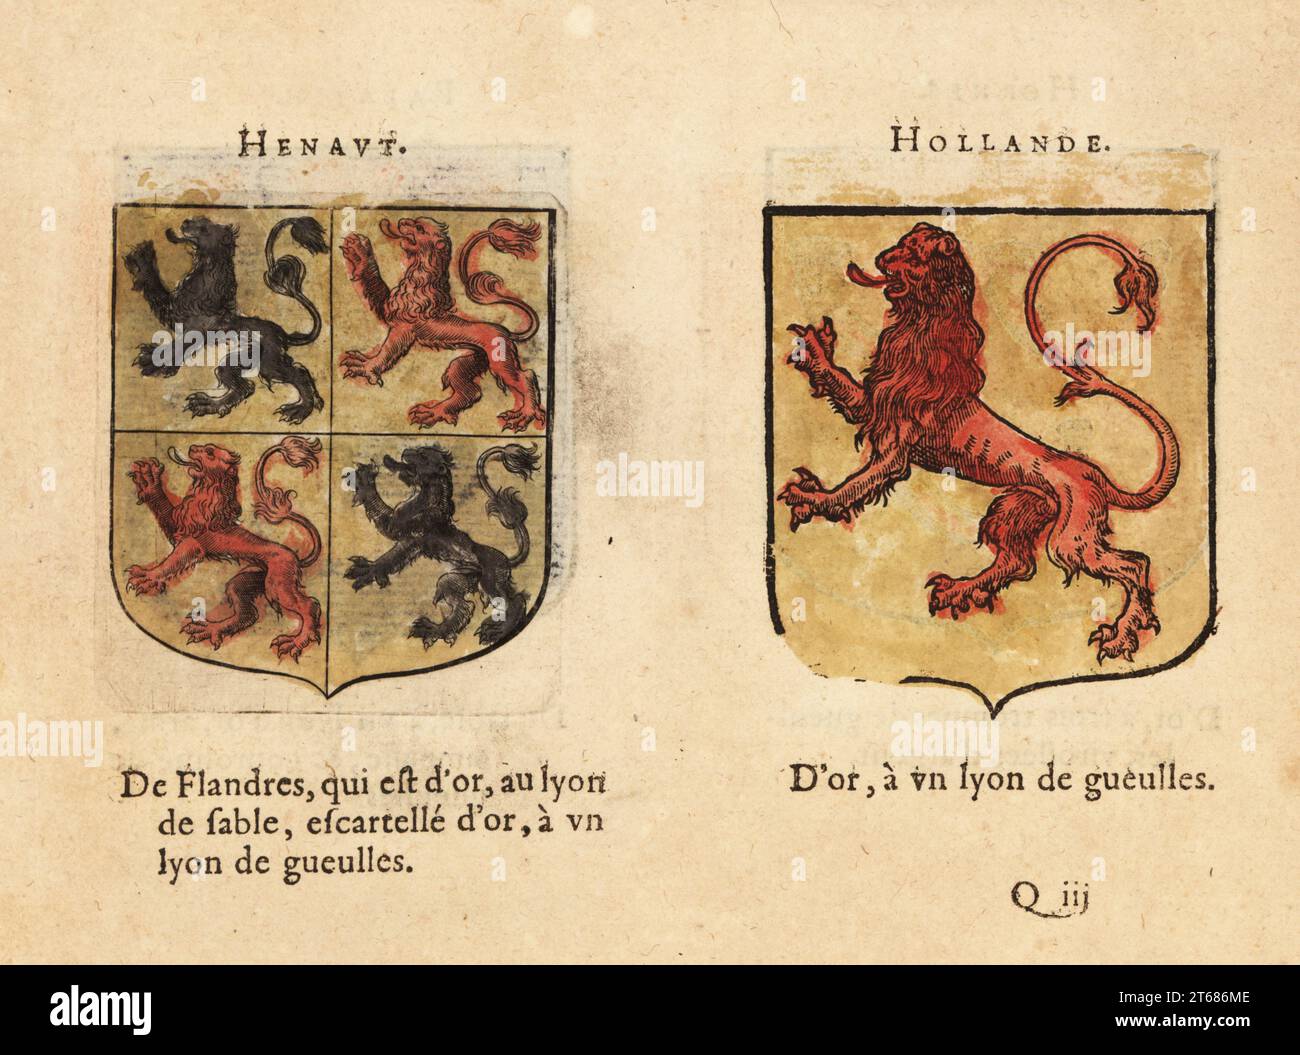 Coat of arms of the Count of Hainaut, Low Countries, black and red lions on gold field, and the Count of Holland, Low Countries, with red lion on gold field. Comtez: Henaut, Hollande. Handcoloured woodblock engraving from Hierosme de Baras Le Blason des Armoiries, Chez Rolet Boutonne, Paris, 1628. Stock Photo